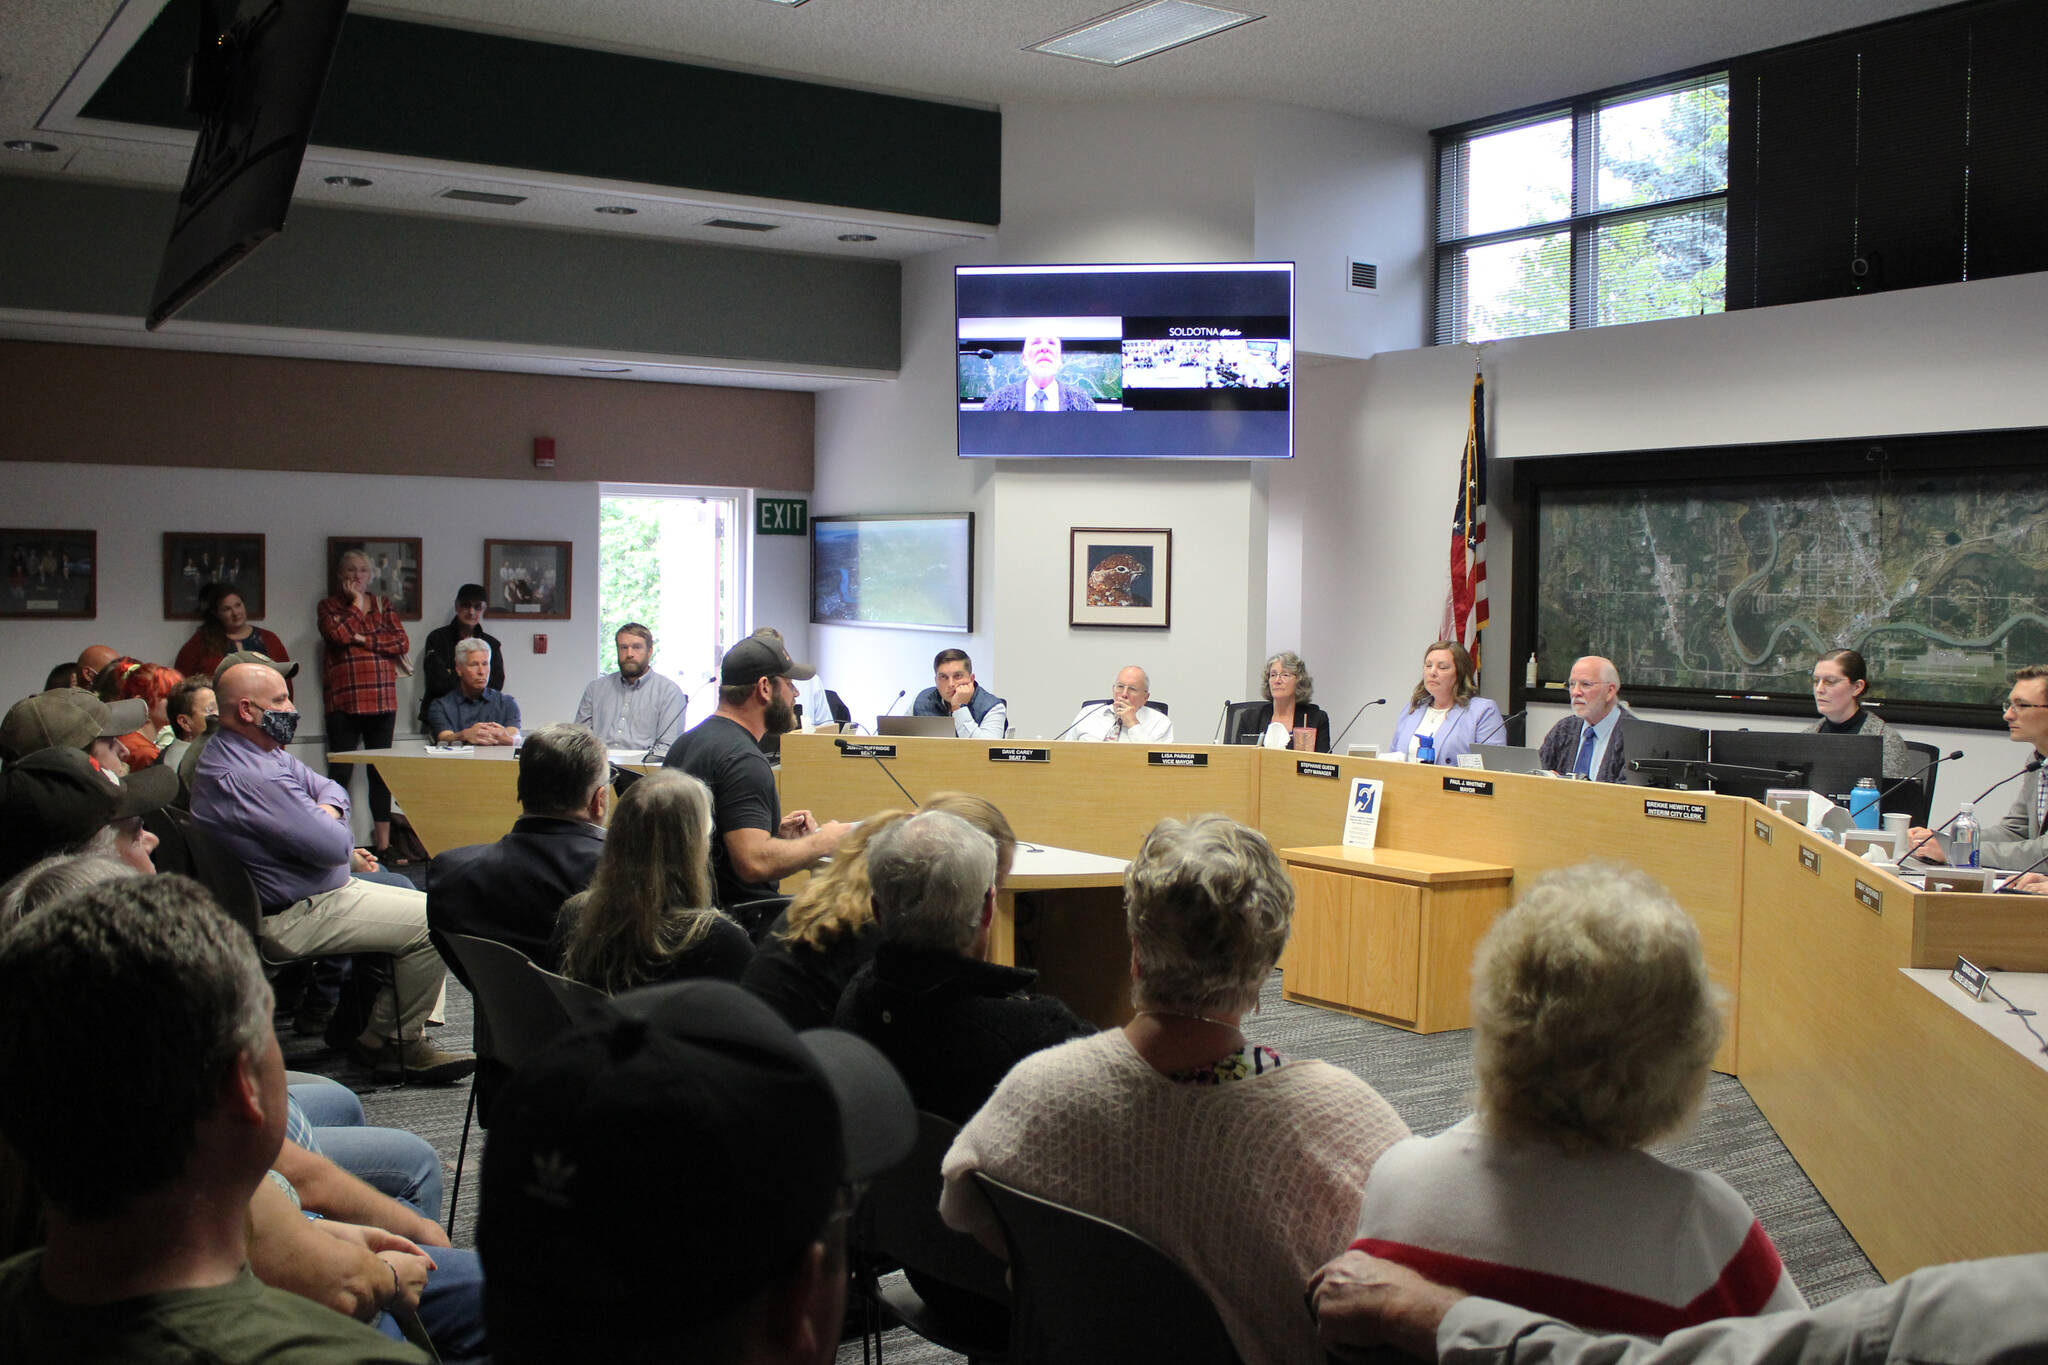 Isaac Kolesar testifies before the Soldotna City Council during a council meeting on Wednesday, July 12, 2022, in Soldotna, Alaska. Many attendees voiced their thoughts on a performance given by a drag queen in Soldotna Creek Park last month. (Ashlyn O’Hara/Peninsula Clarion)